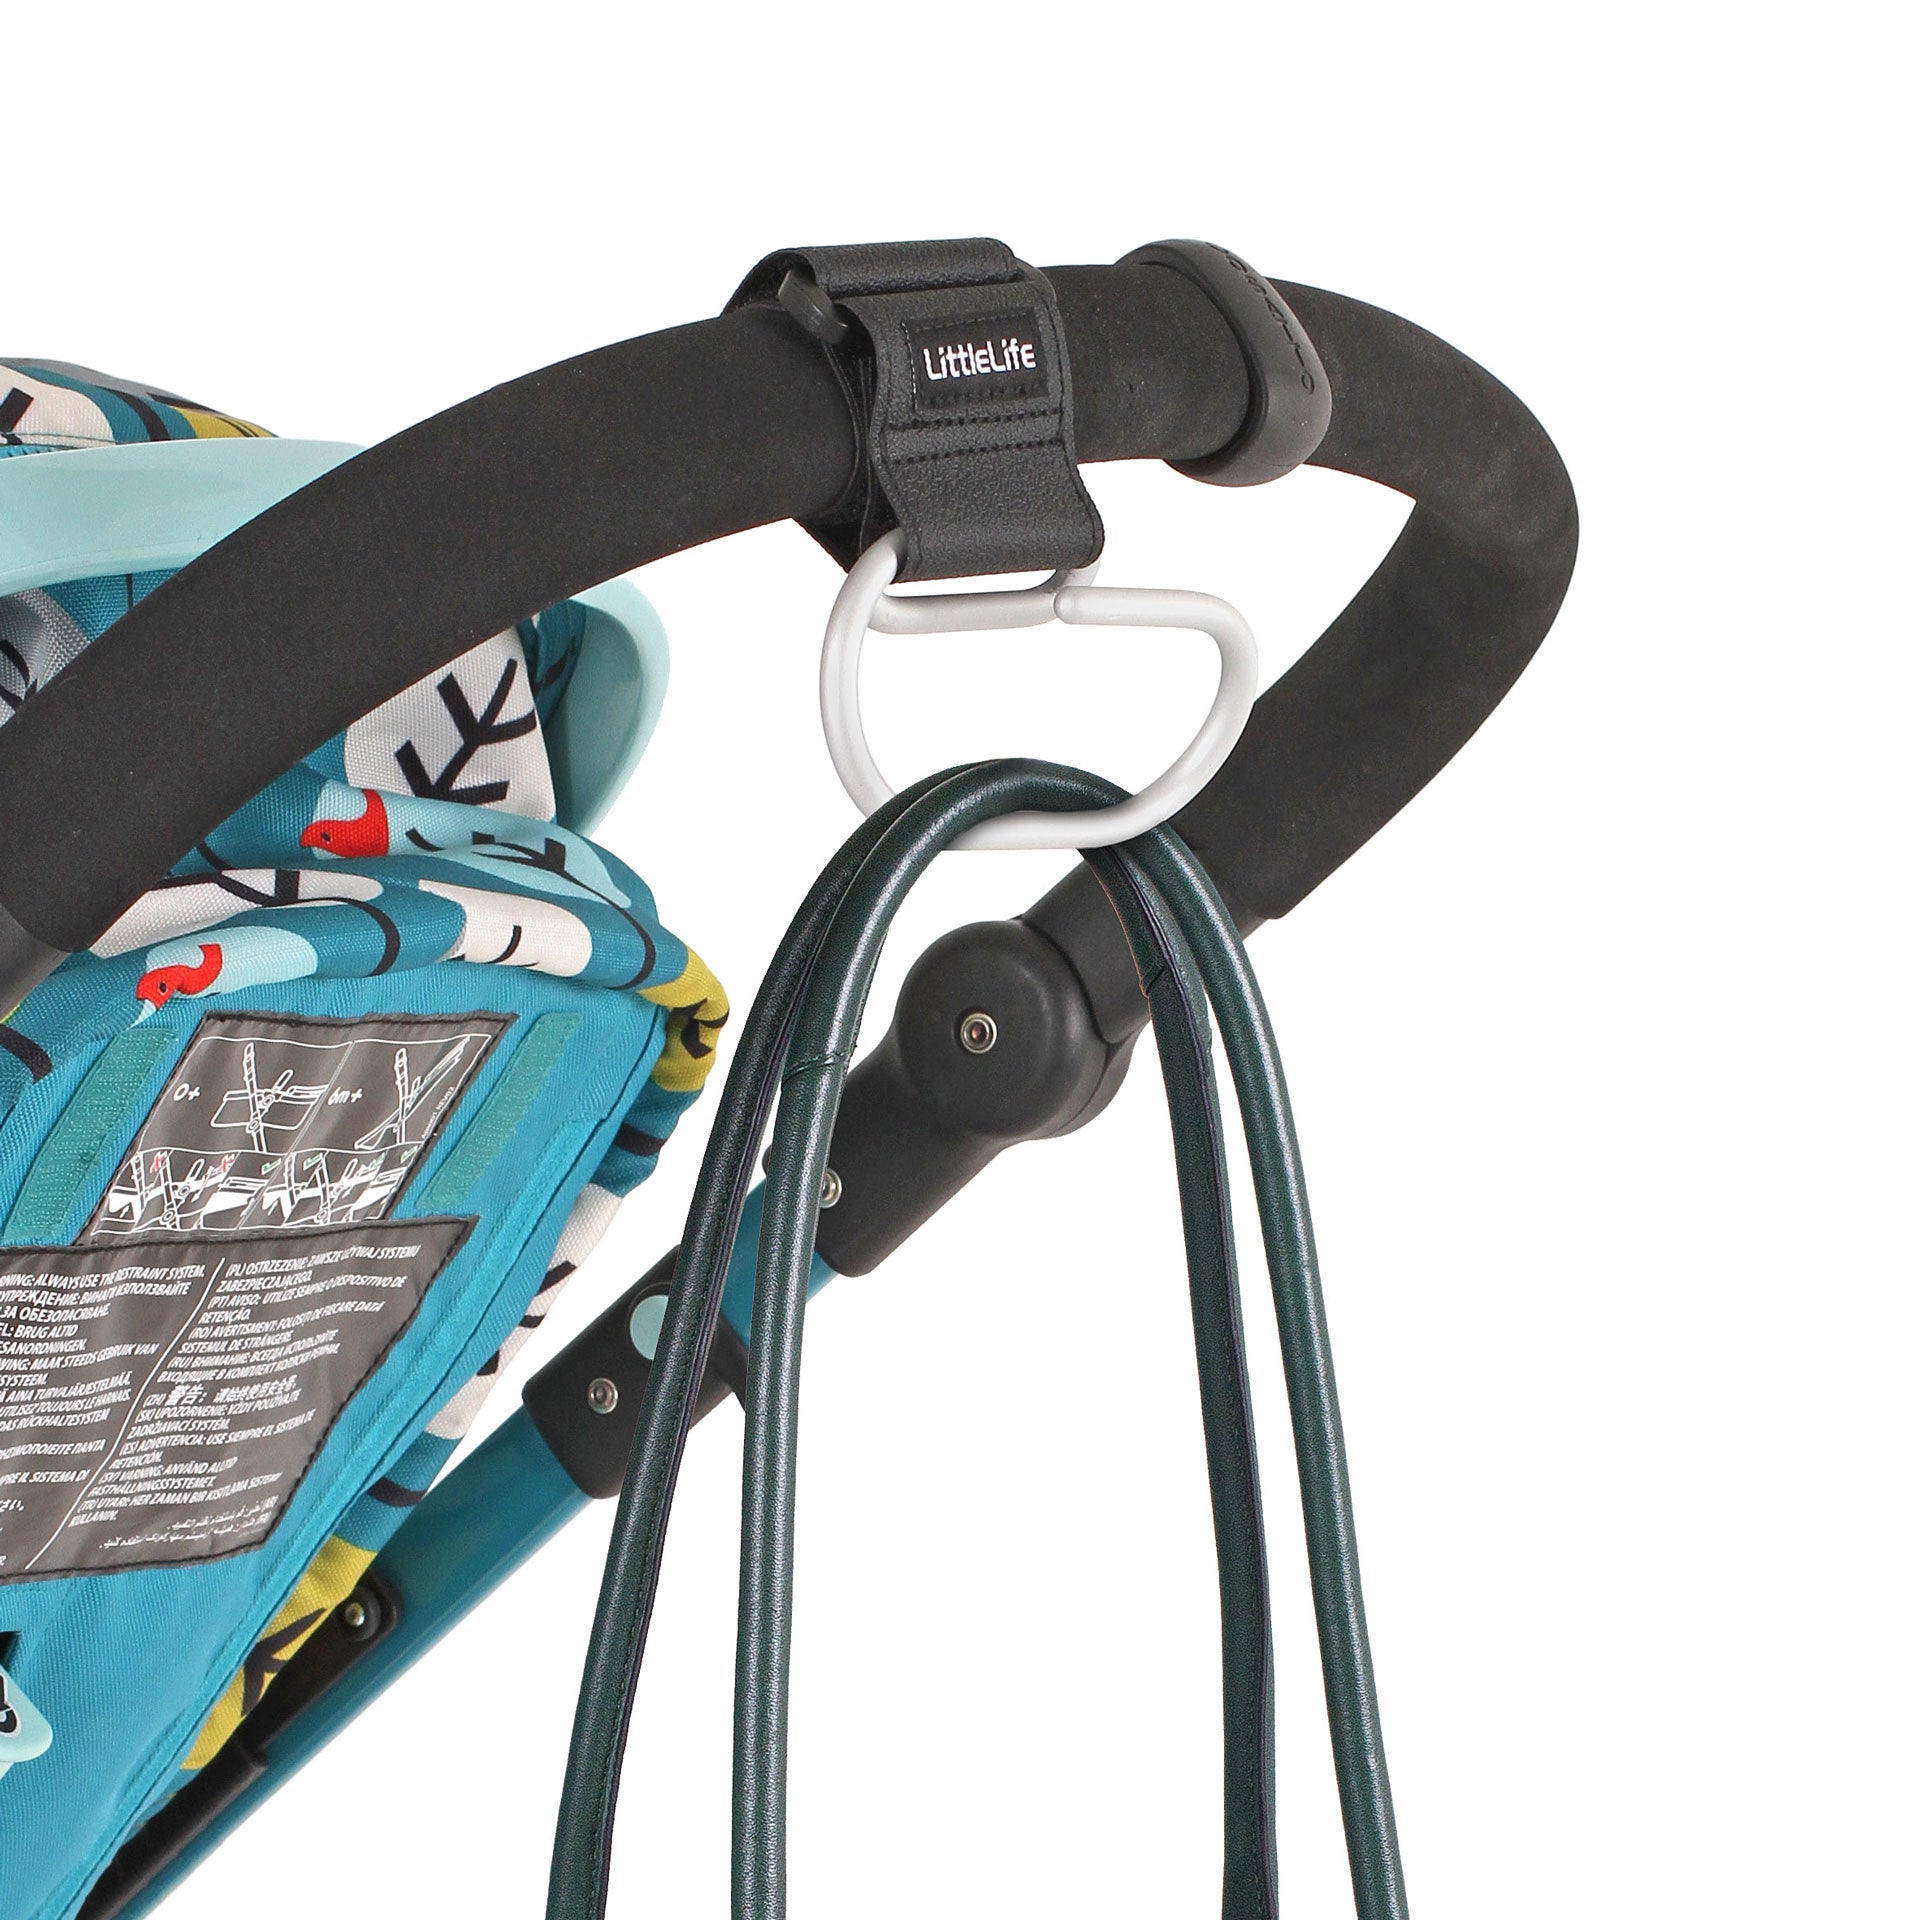 Go Pal HB1 Stroller Hooks for Hanging Bags and Shopping Universal